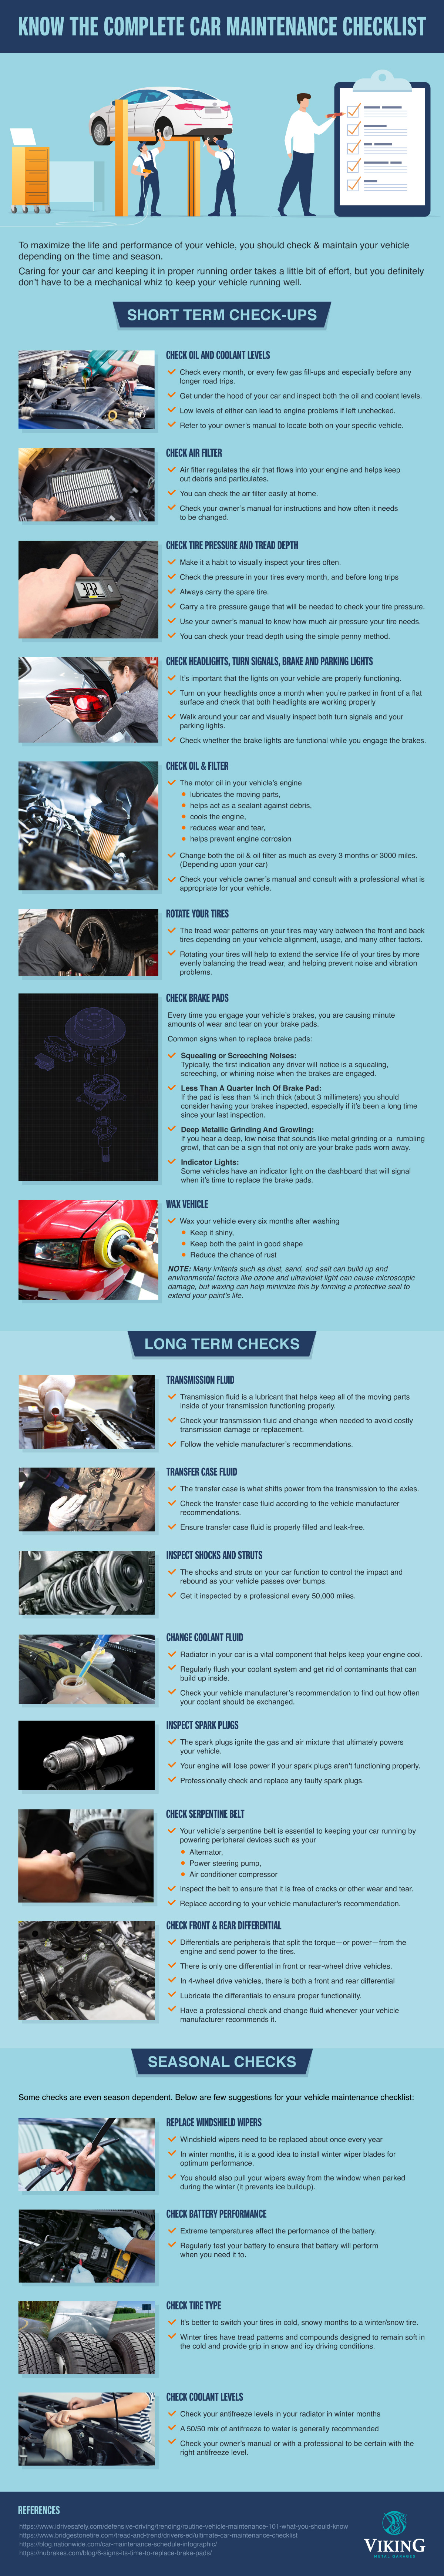 Know the Complete Car Maintenance Checklist